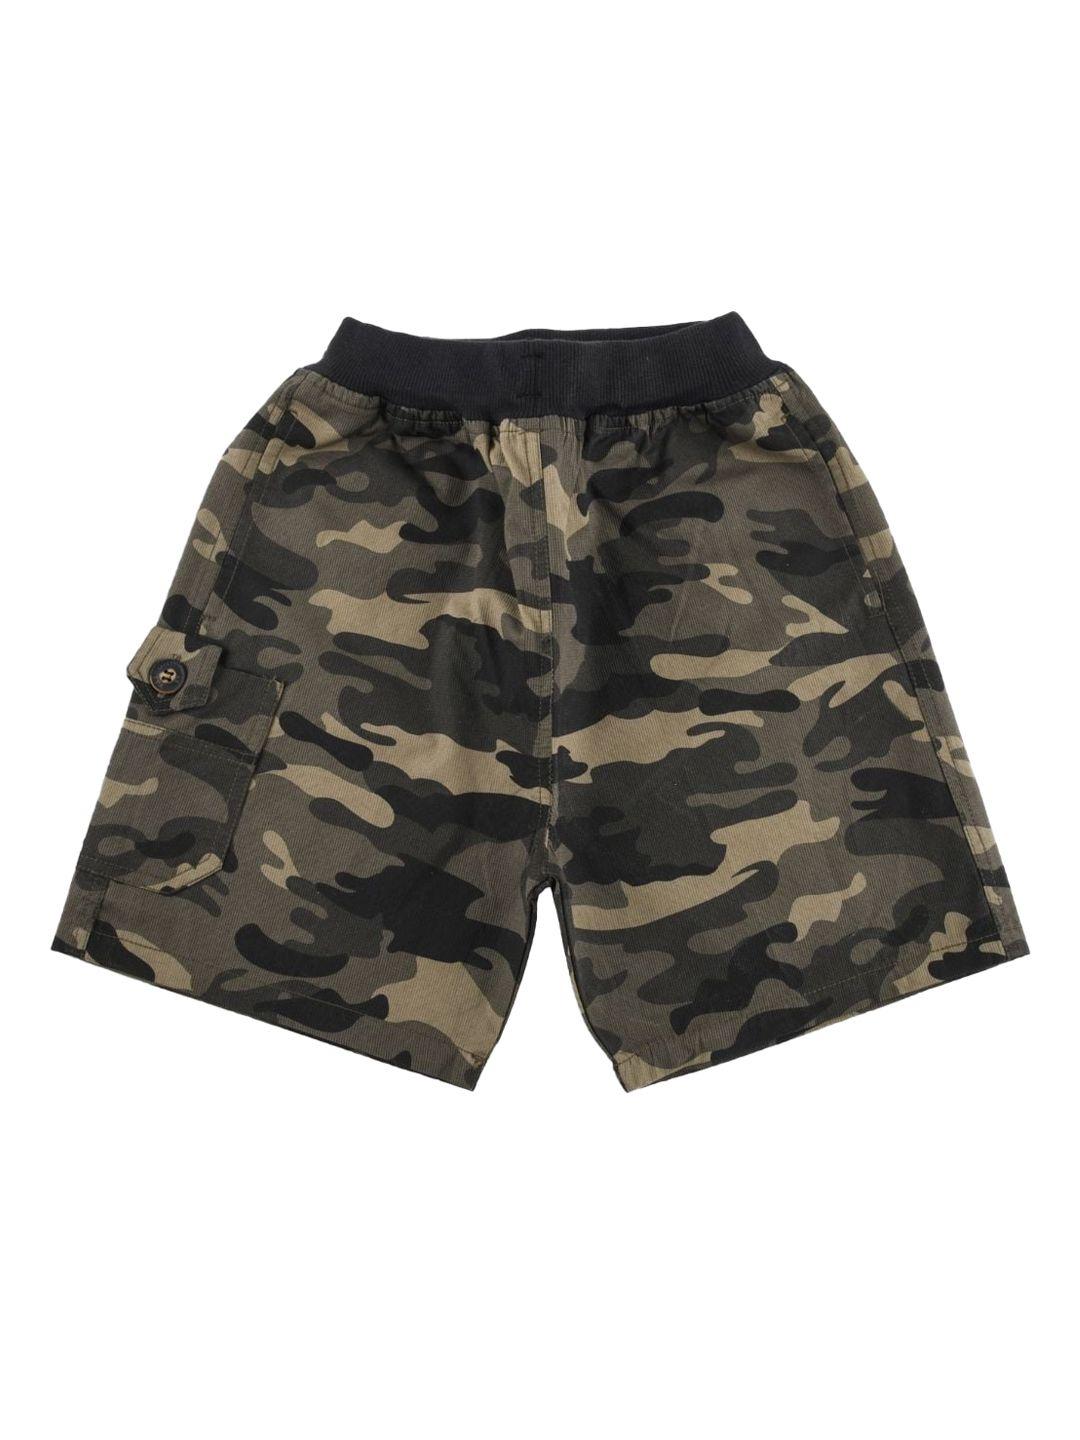 vedana-boys-brown-&-green-camouflage-printed-shorts